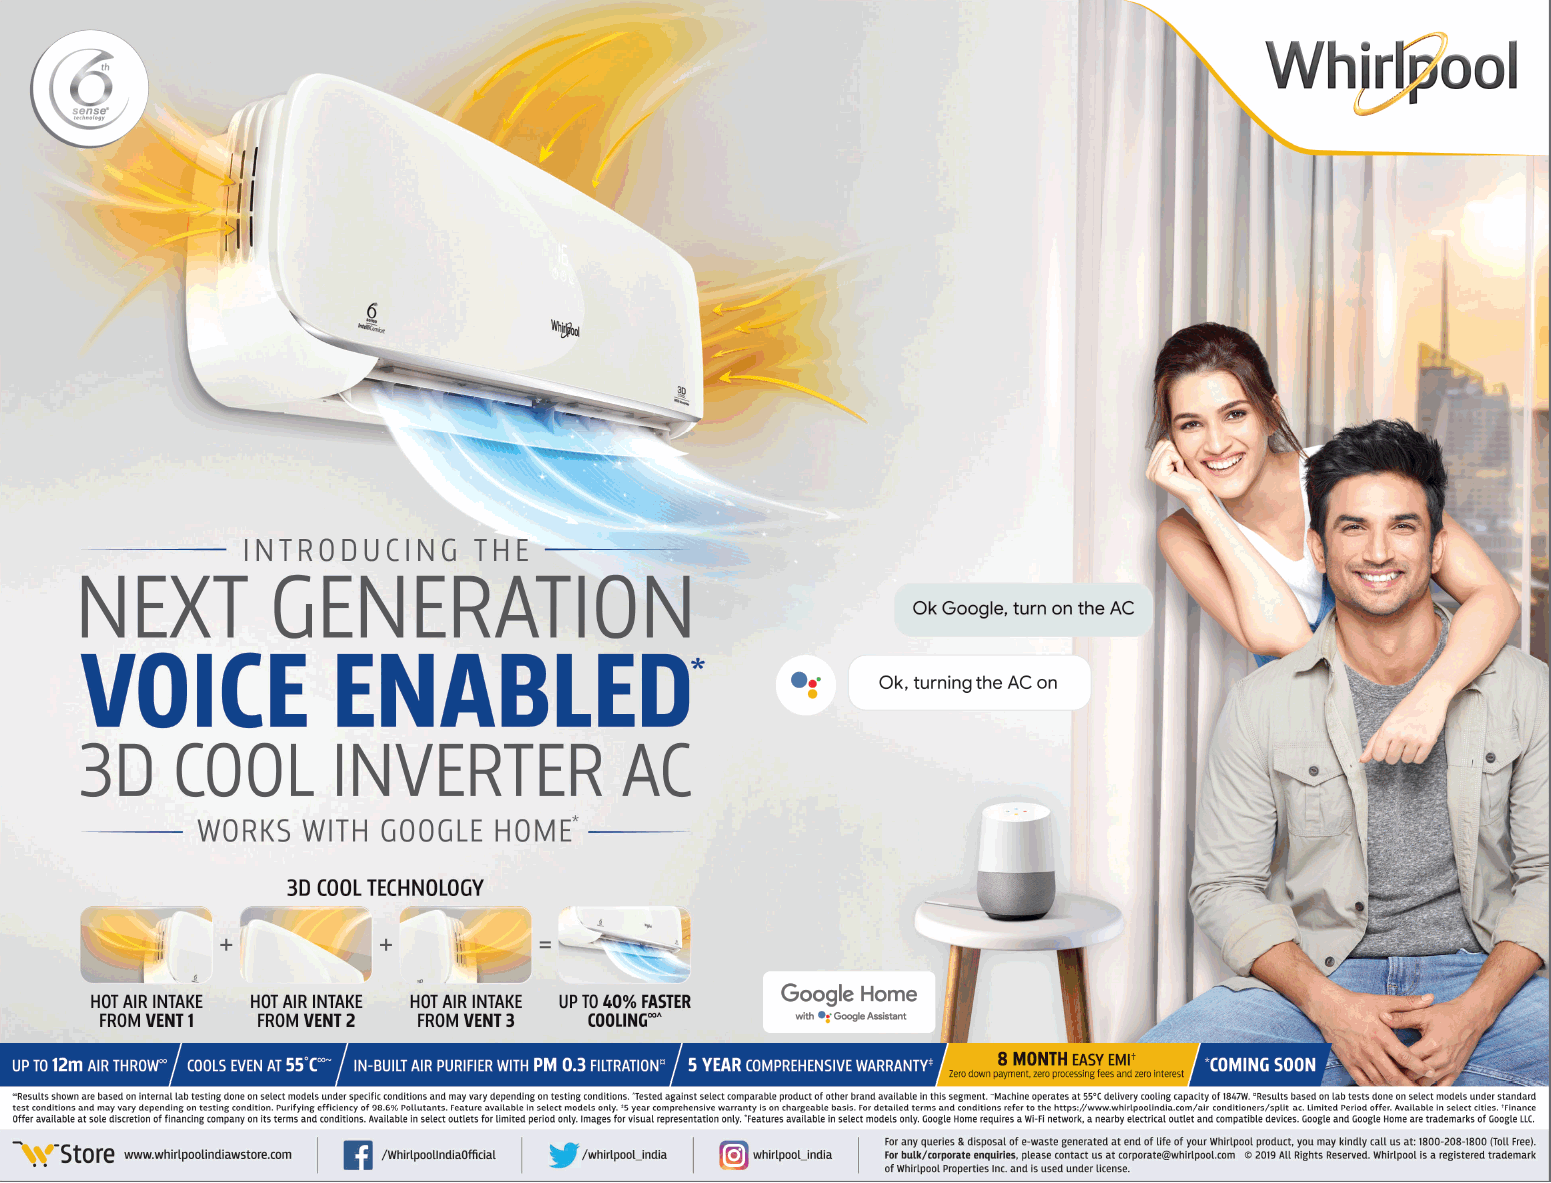 whirlpool-air-conditioners-next-generation-voice-enabled-3d-cool-inverter-ac-ad-bangalore-times-09-04-2019.png